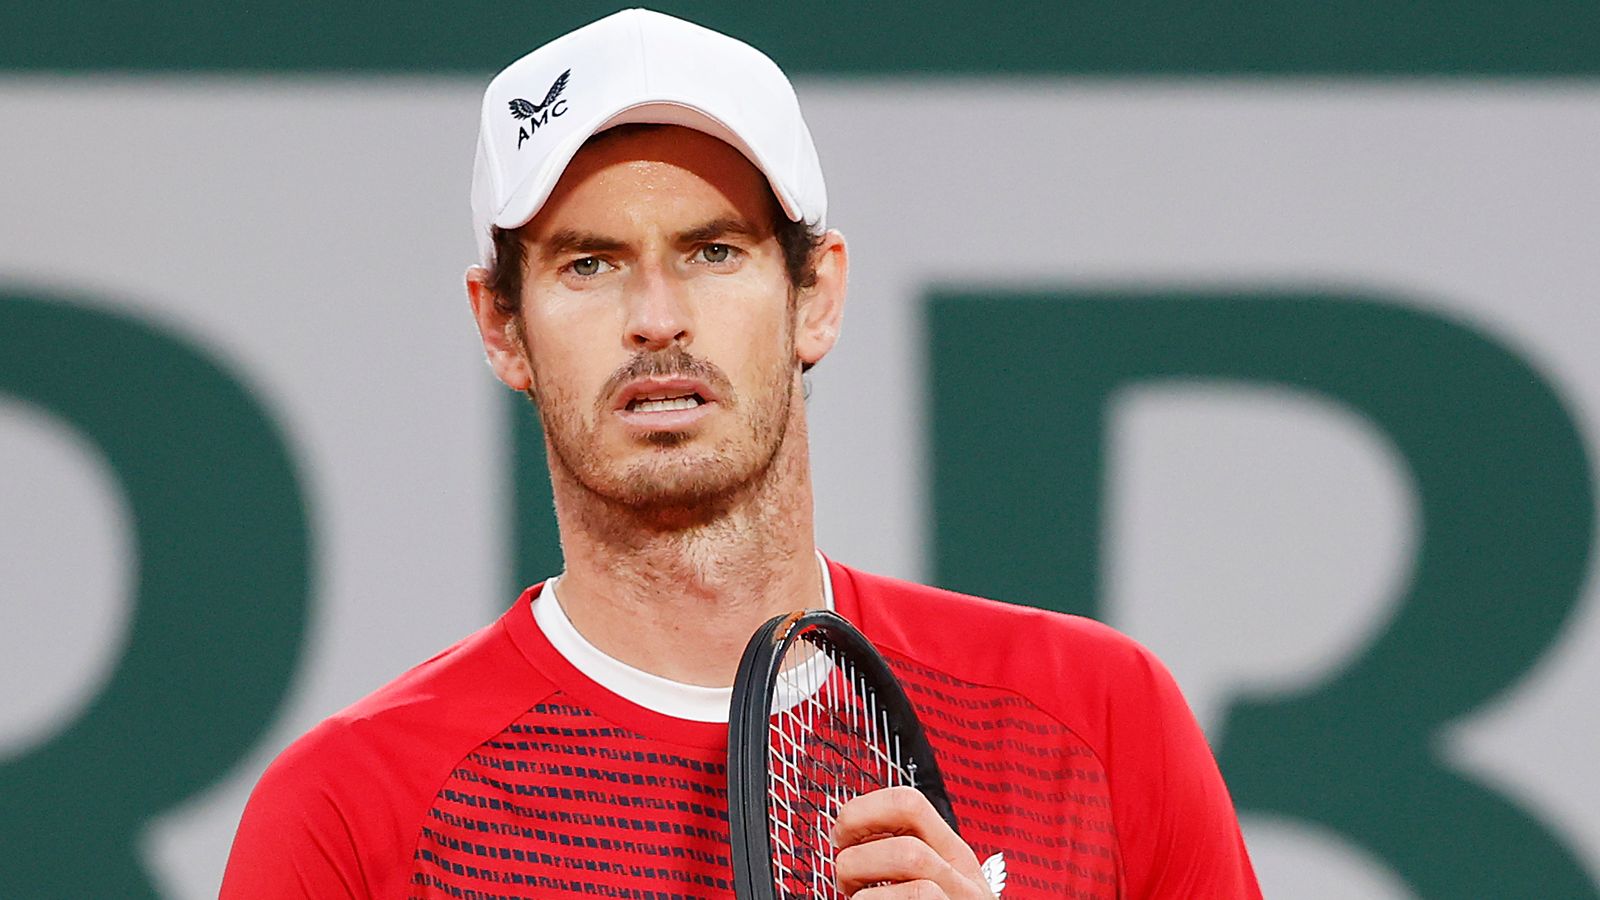 Andy Murray handed tough draw at bett1HULKS Indoors in Cologne | Tennis News | Sky Sports